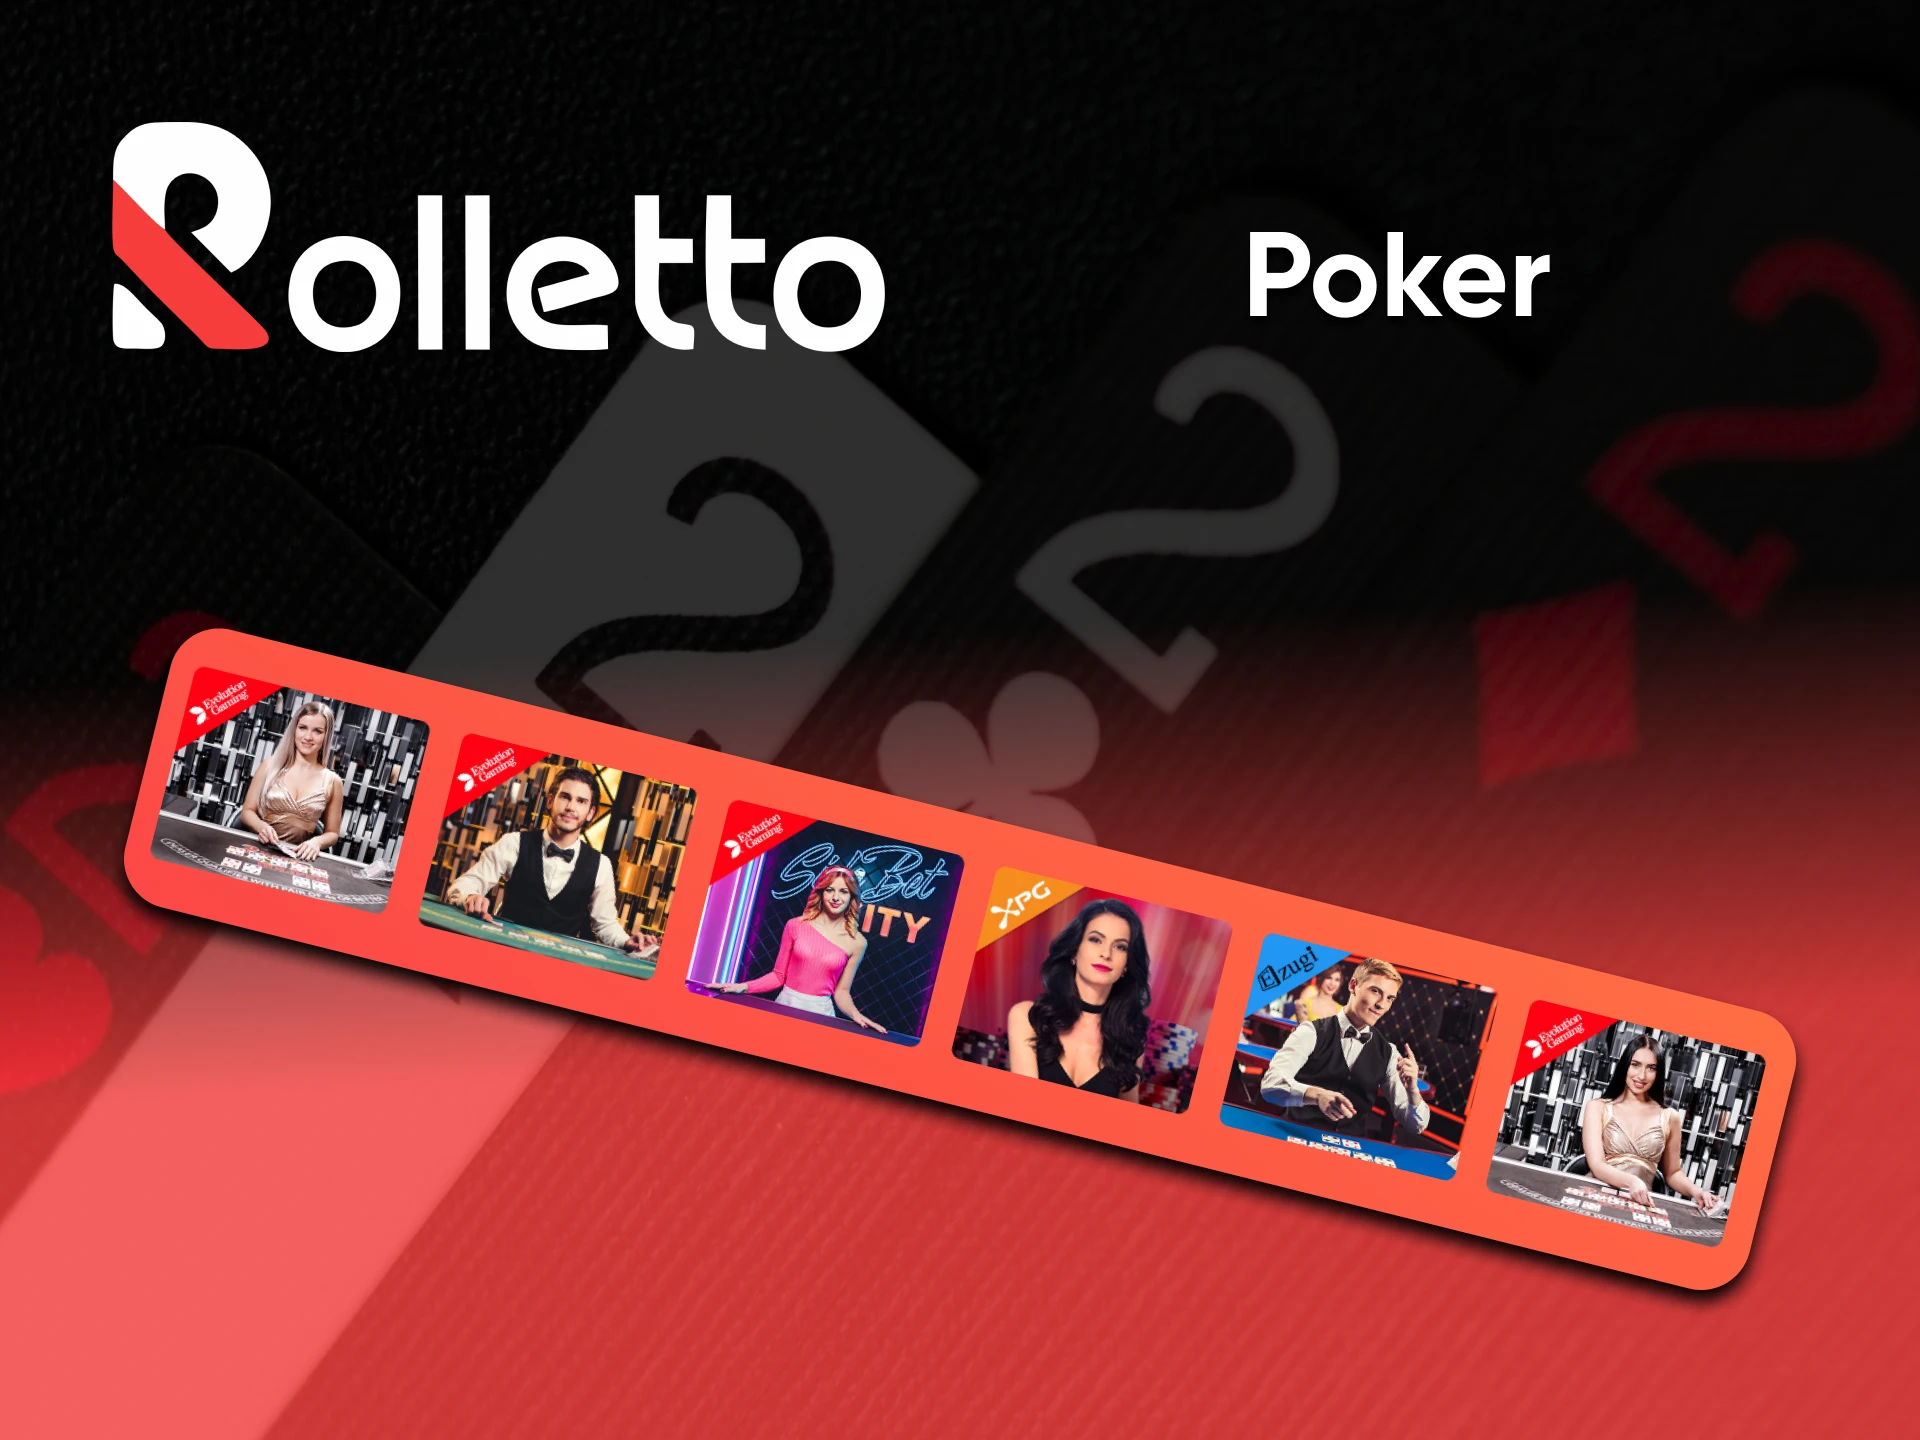 To play Poker, go to the special section of the Rolletto website.